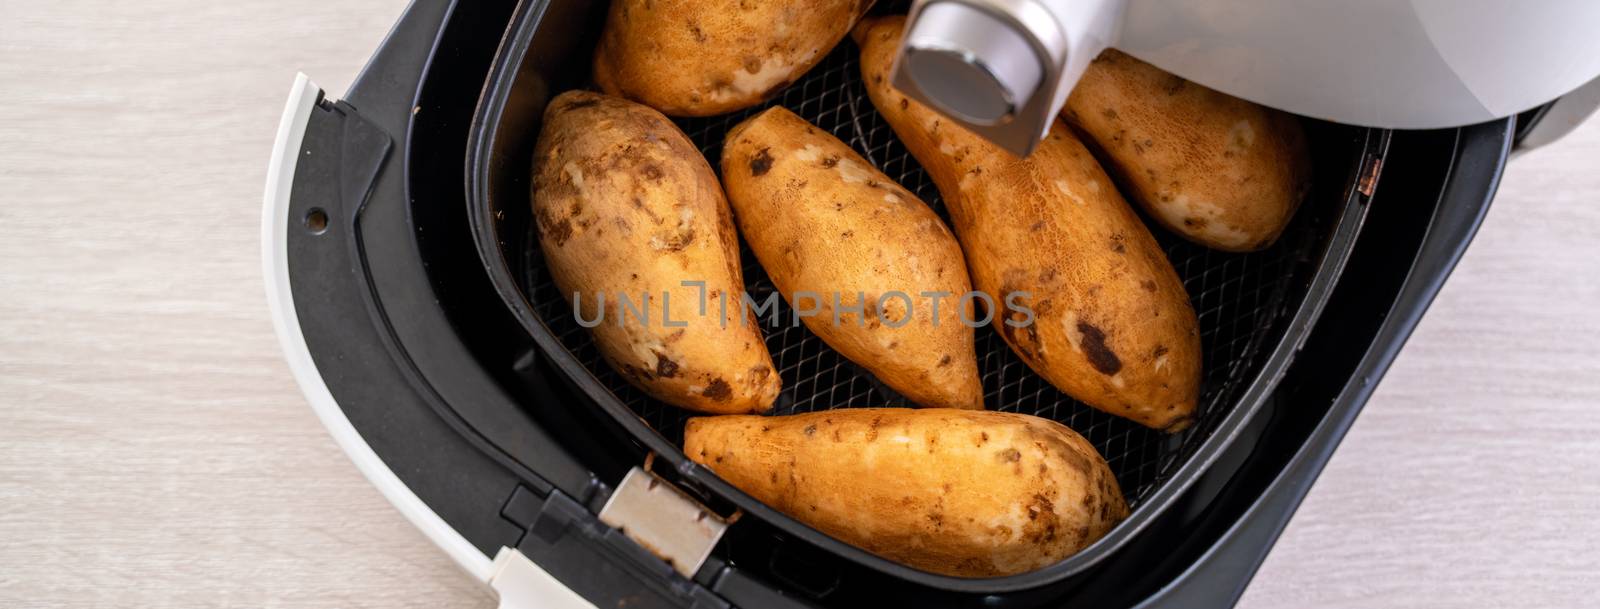 Roasted sweet potato cooked by airfryer at home. Healthy food for diet eating.